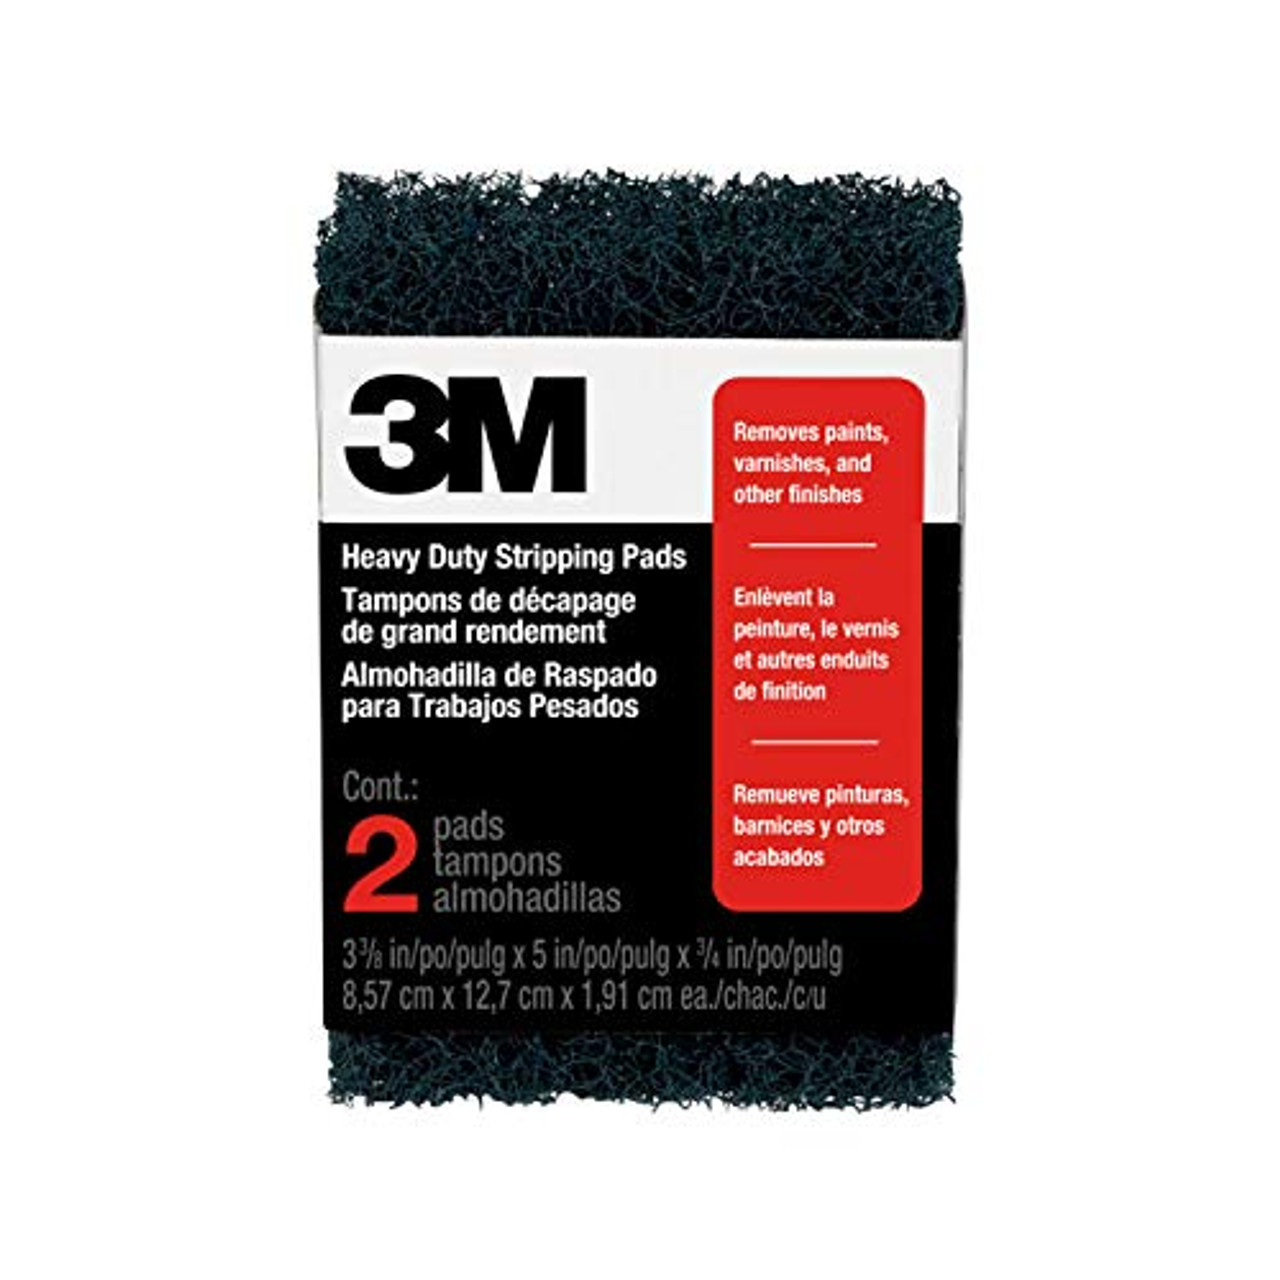 3M Heavy Duty Stripping Pads, 3.375-Inch by 5-Inch by .75-Inch, 2-Pack